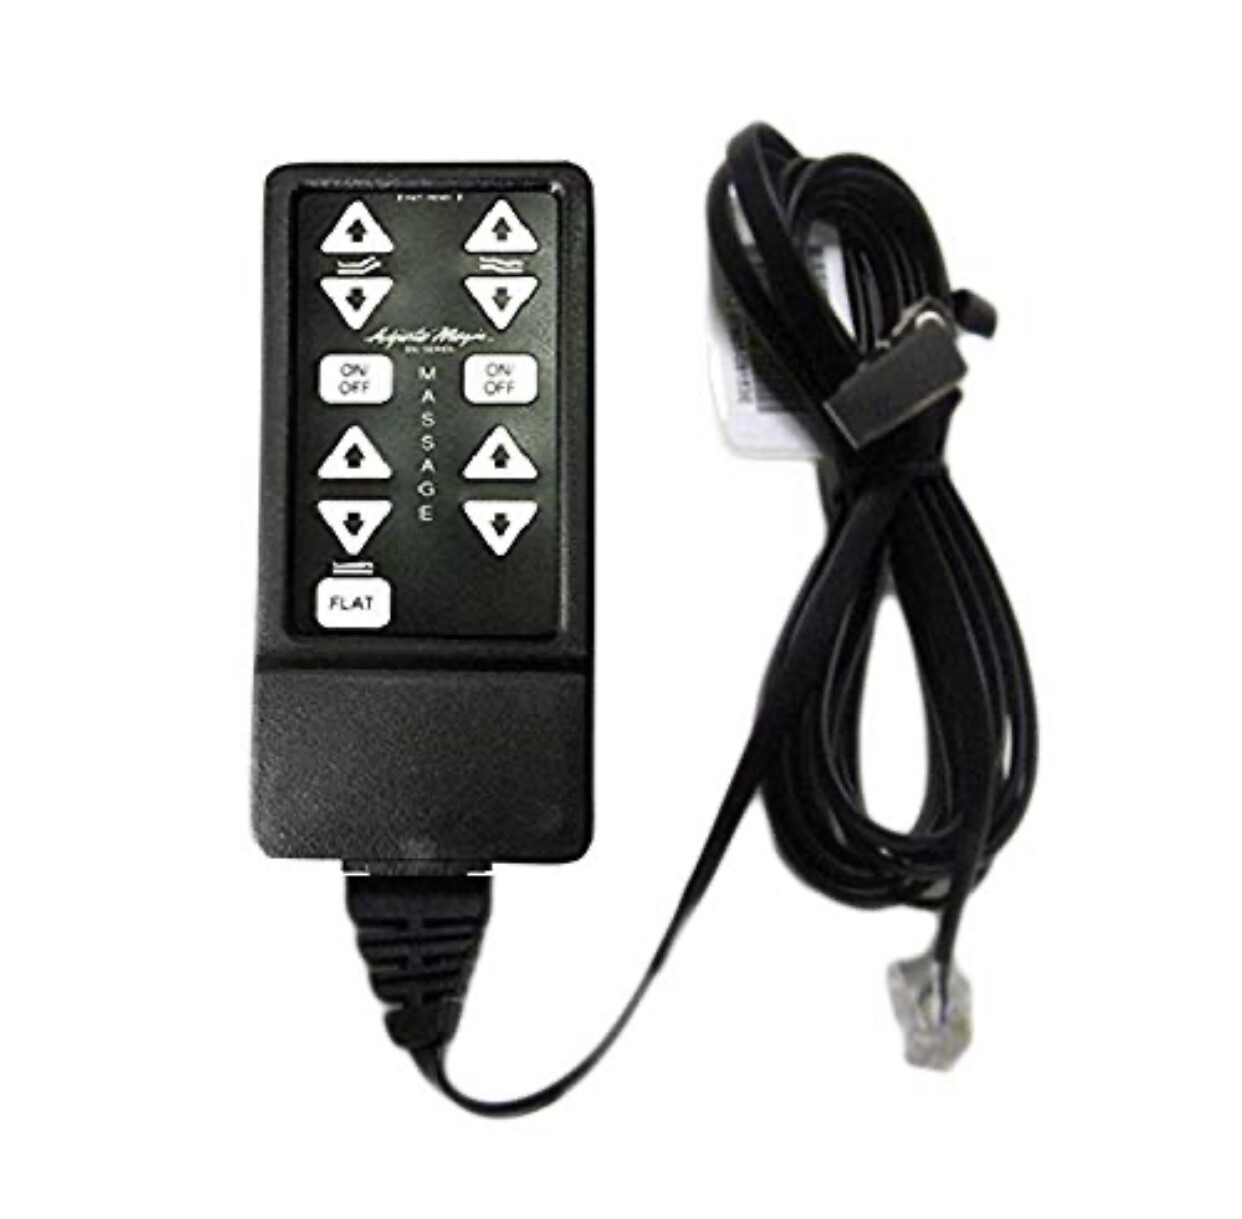 Adjusta-Magic E92 (e-92), Wired Contour Premier, and Replacement For Certain Wired Craft 1 Craftmatic Corded Remotes